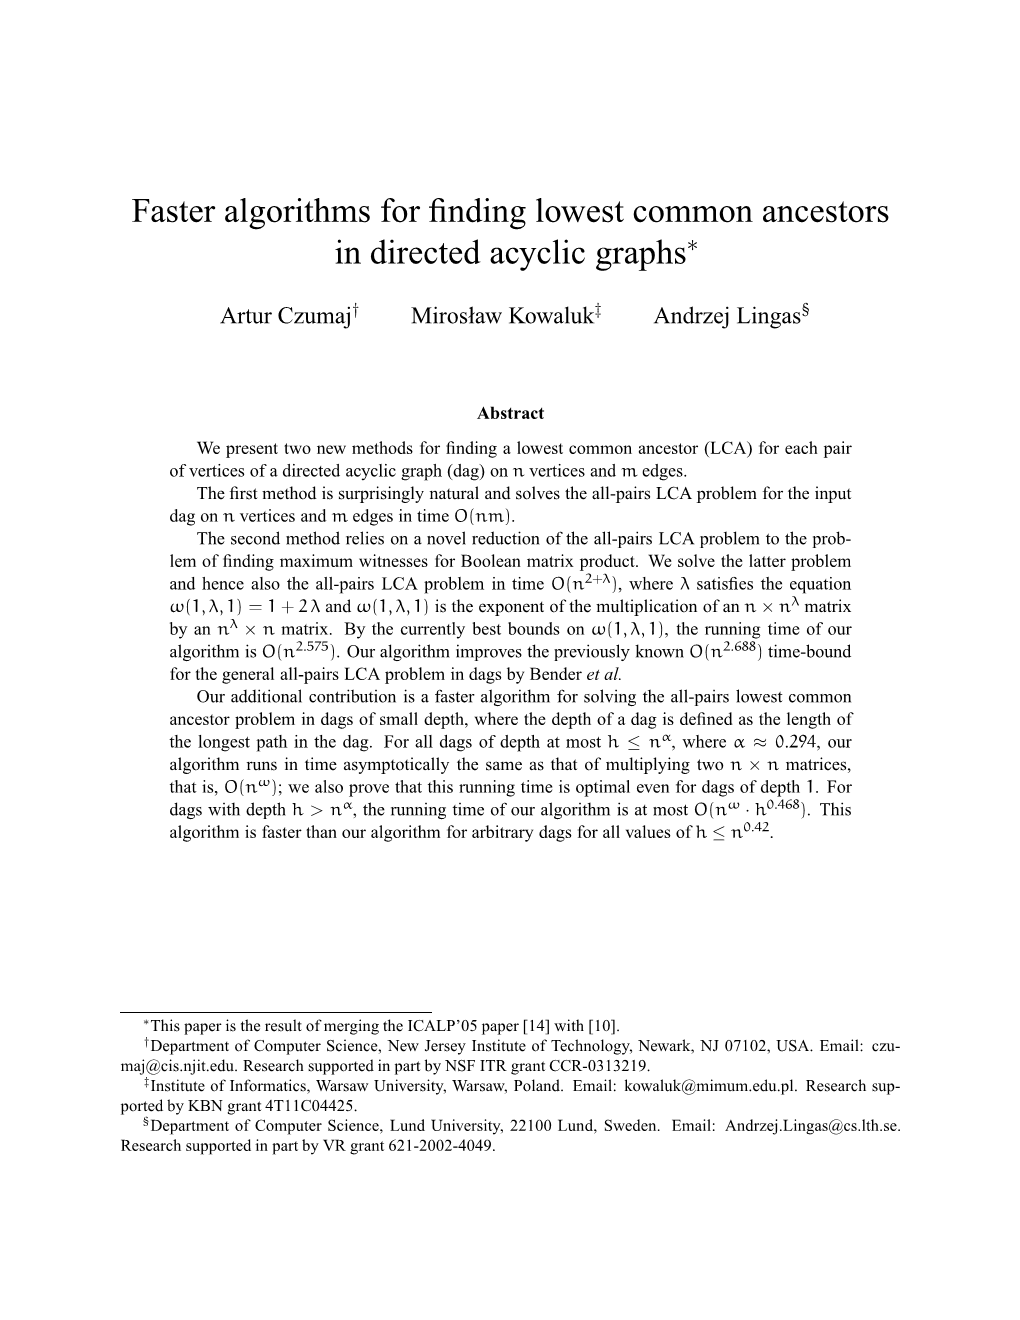 Faster Algorithms for Finding Lowest Common Ancestors in Directed